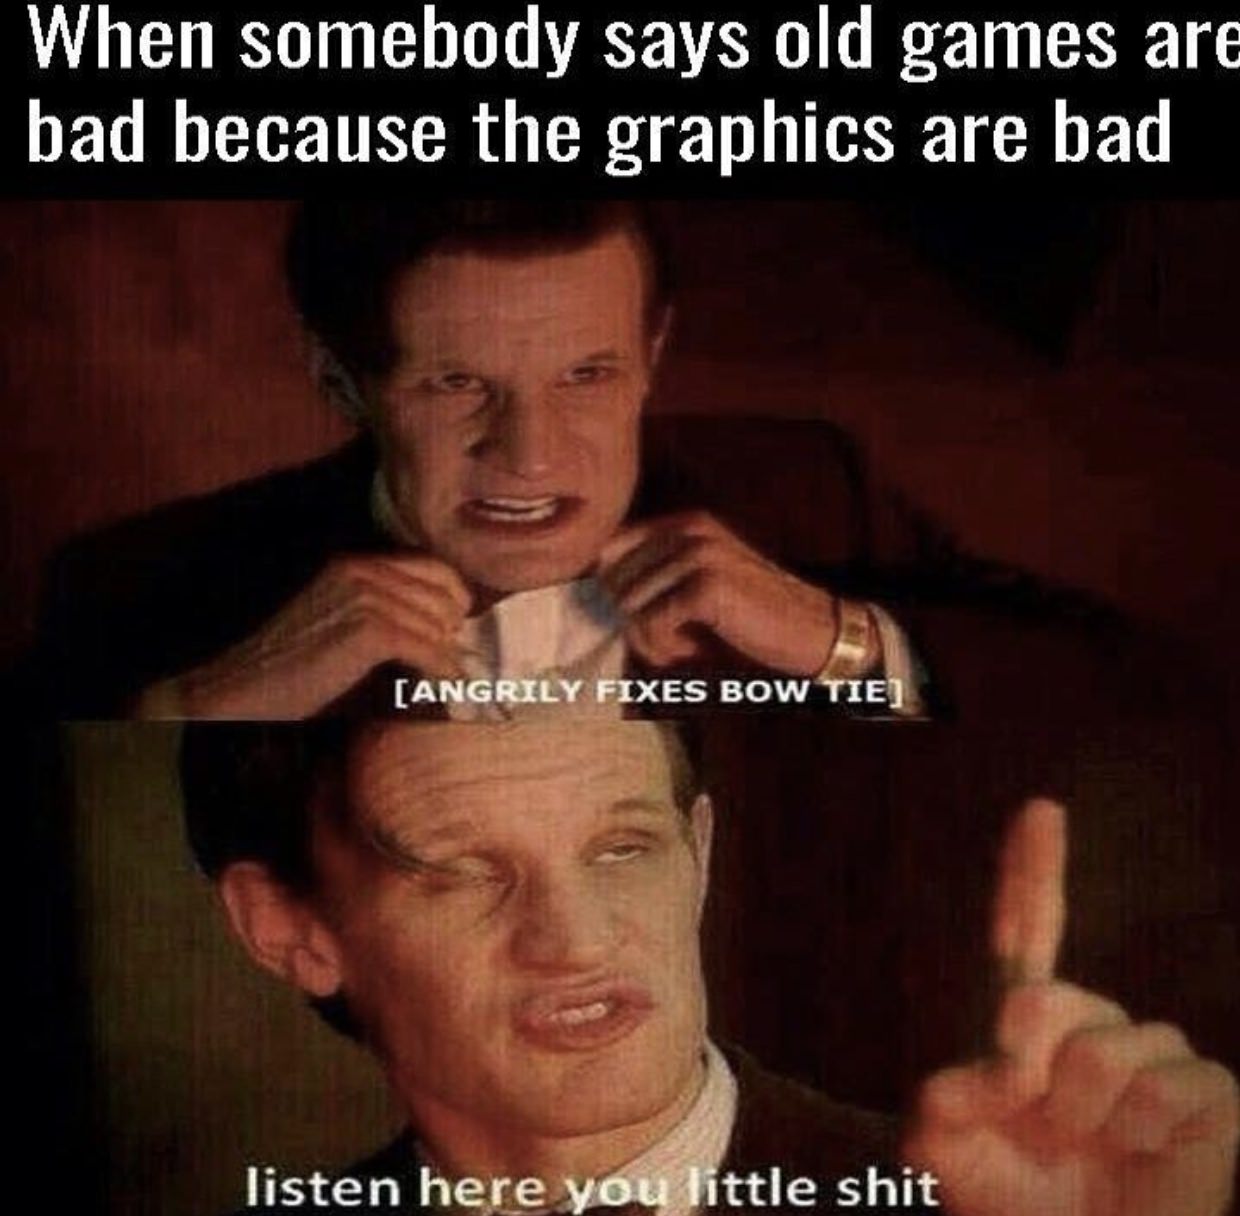 listen here you little shit doctor - When somebody says old games are bad because the graphics are bad Angrily Fixes Bow Tie listen here you little shit